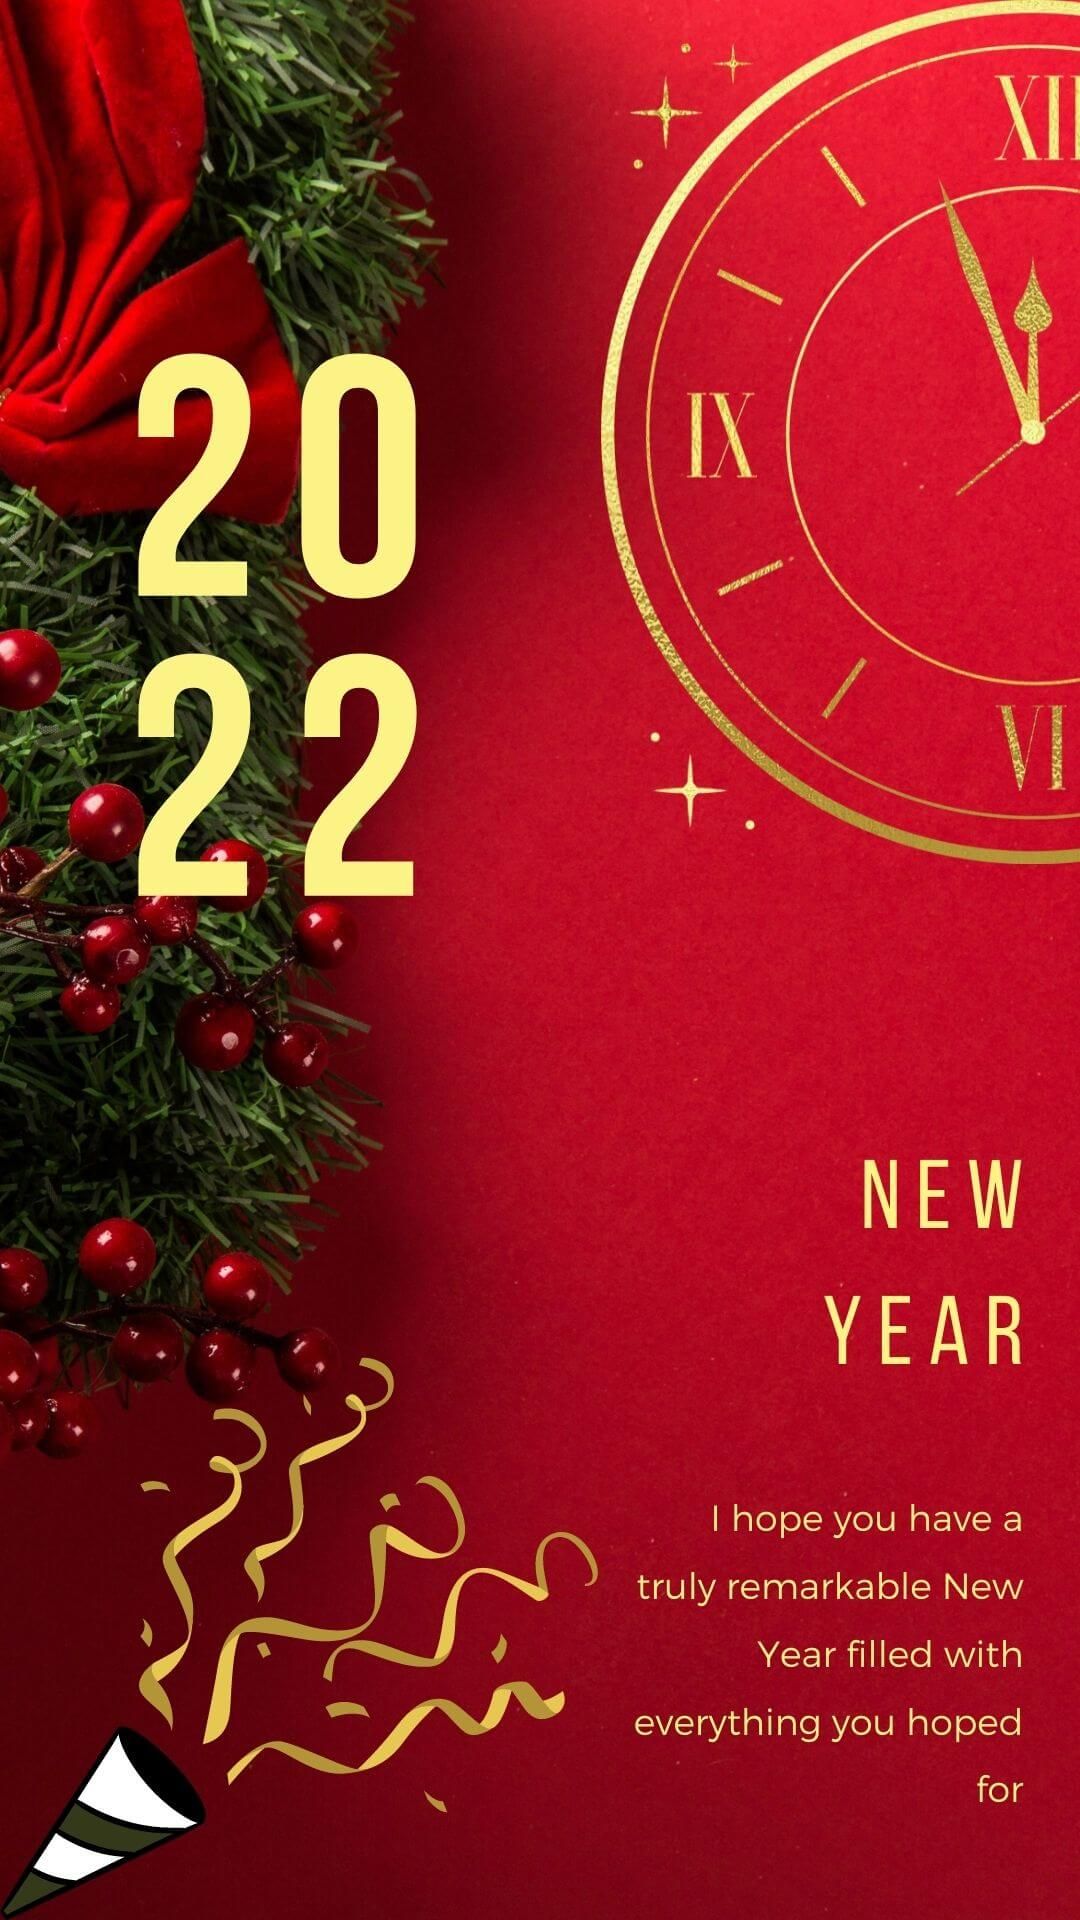 Latest New Year 2023 Wallpaper and Image for iPhone 14 Pro and iPads Square. Happy new year wallpaper, New year wallpaper, Happy new year picture